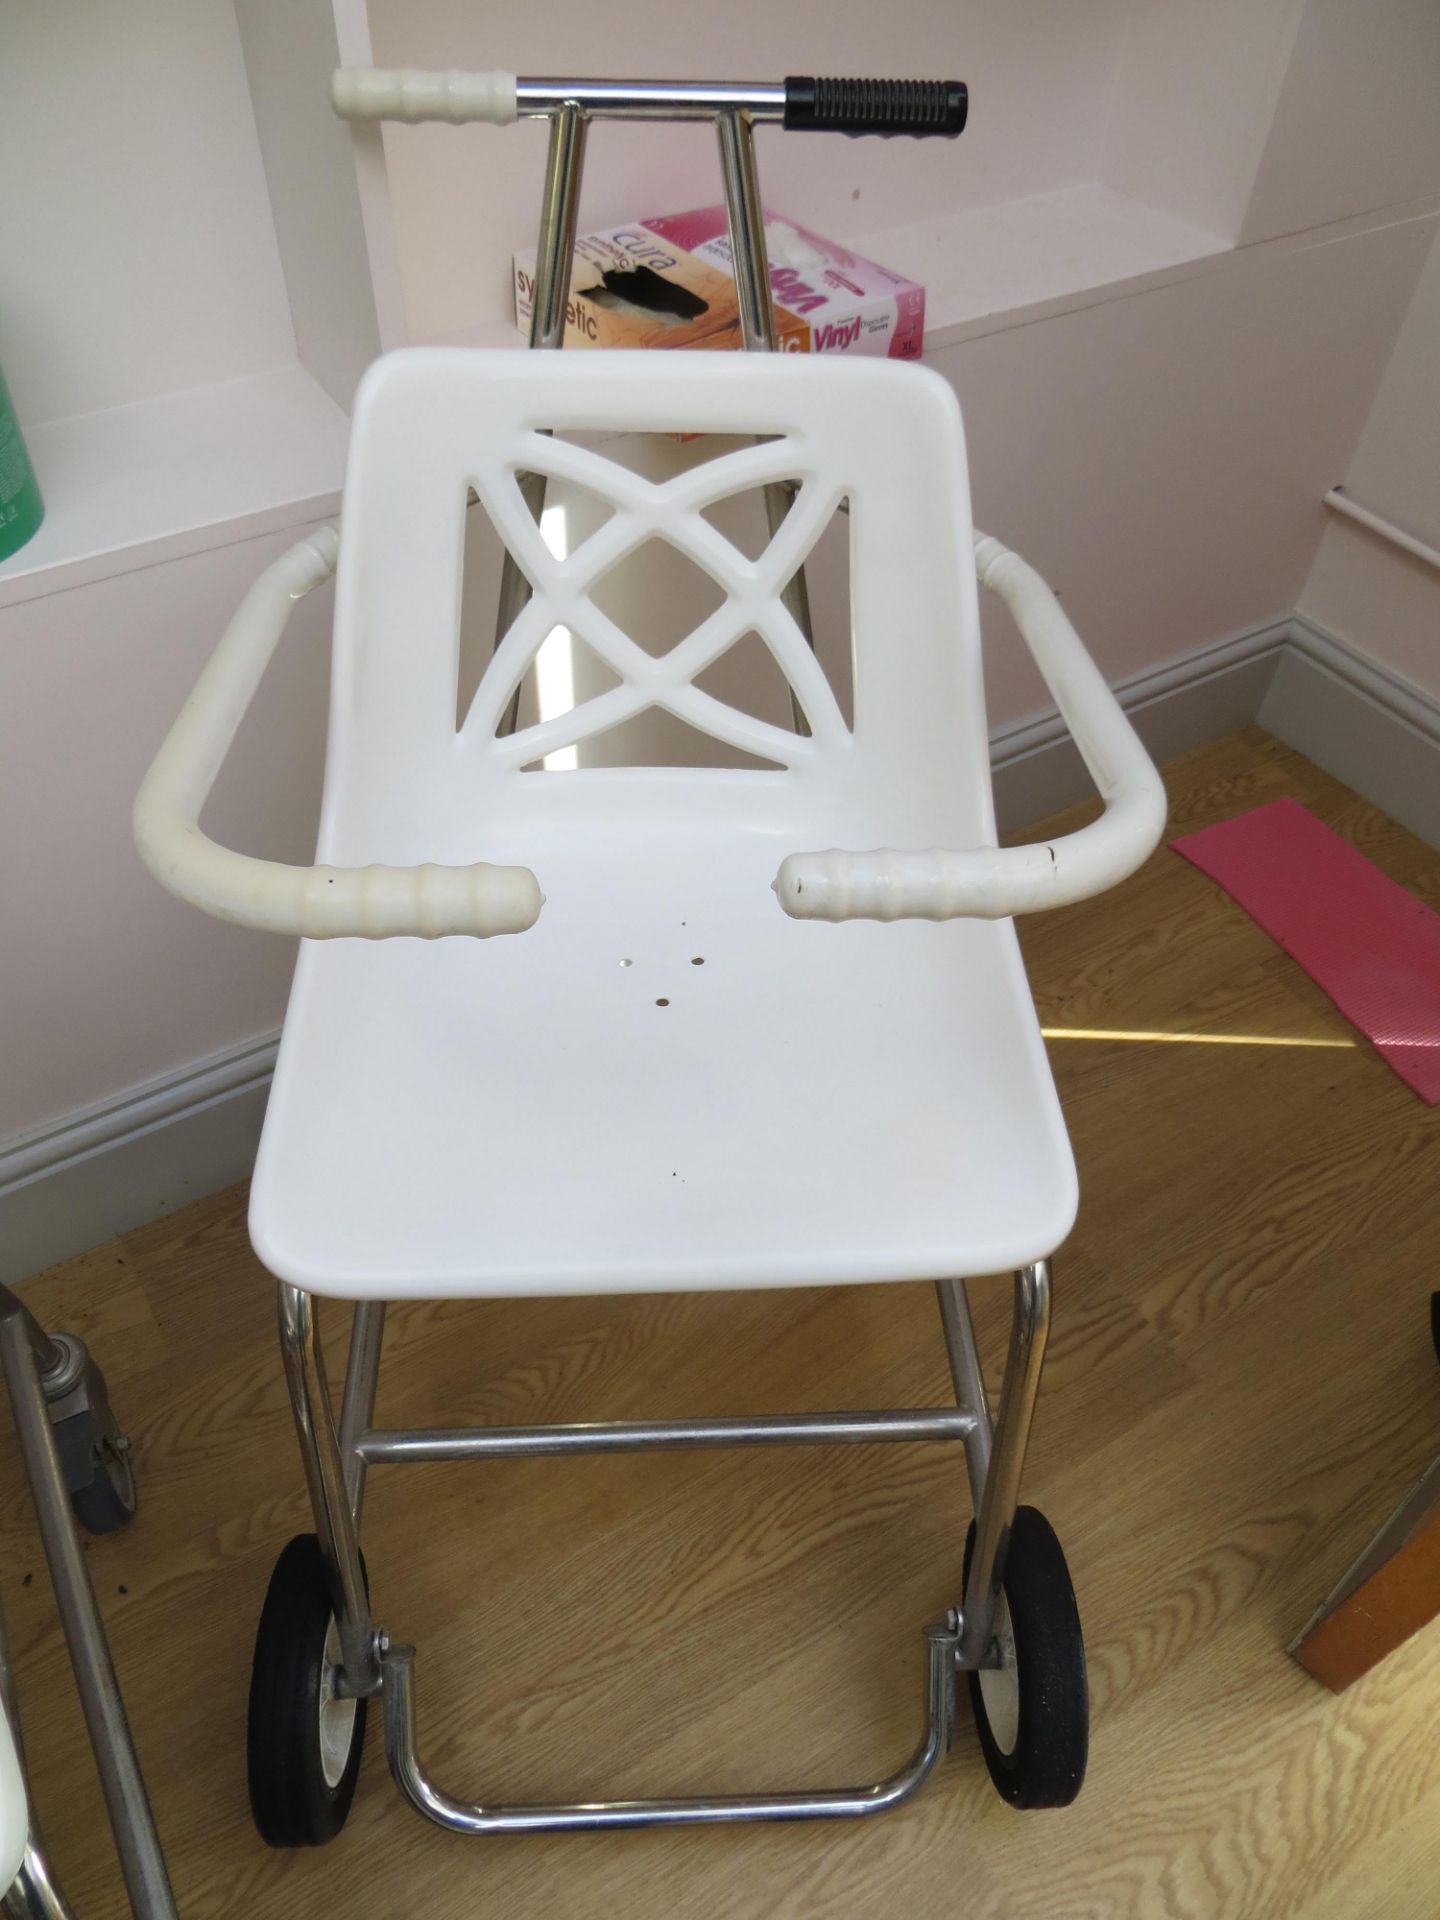 Two mobile shower chairs - Image 2 of 2